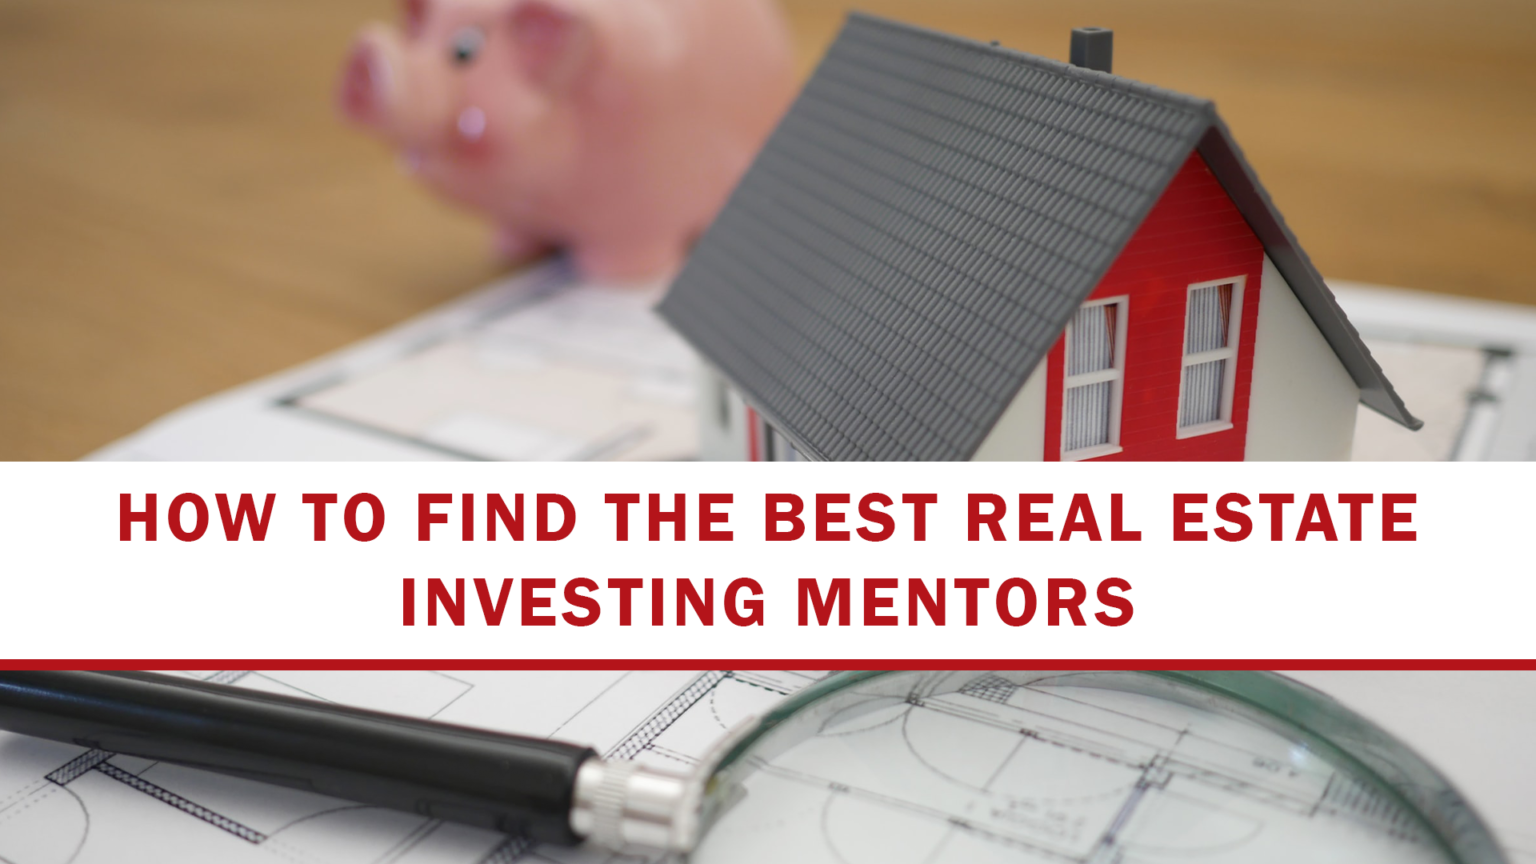 How To Find The Best Real Estate Investing Mentors